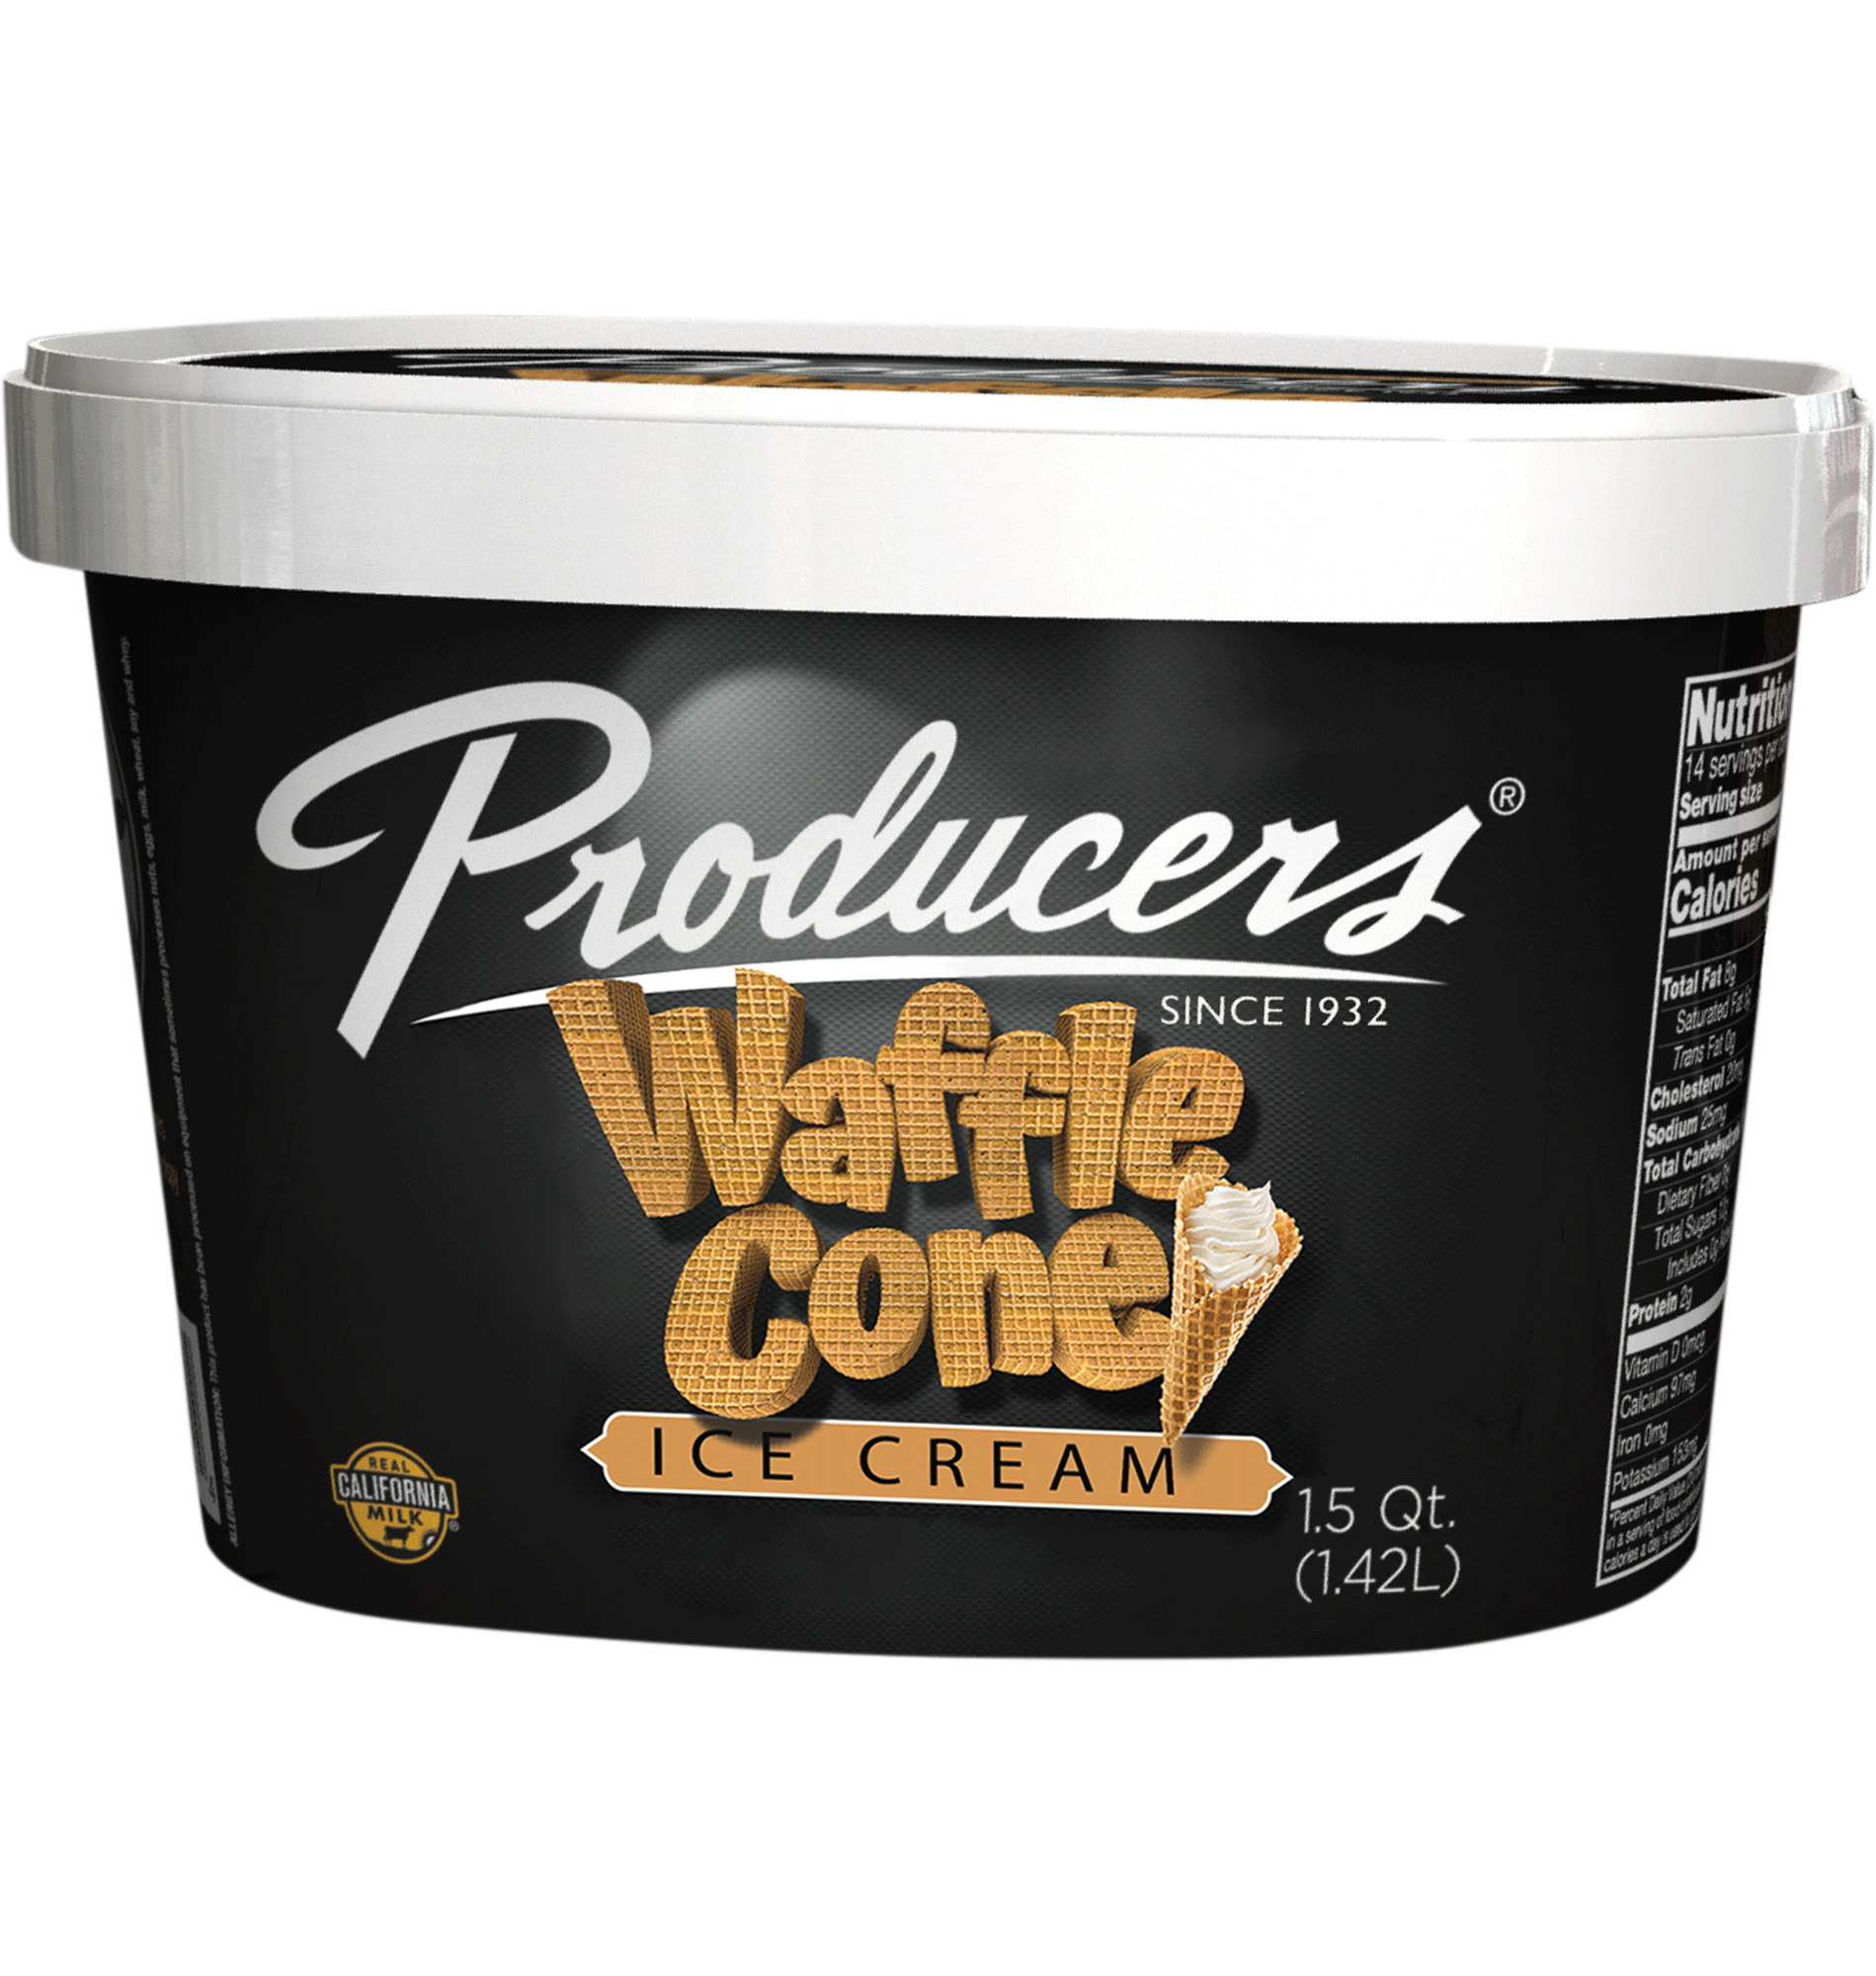 Waffle Cone Producers Ice Cream Container